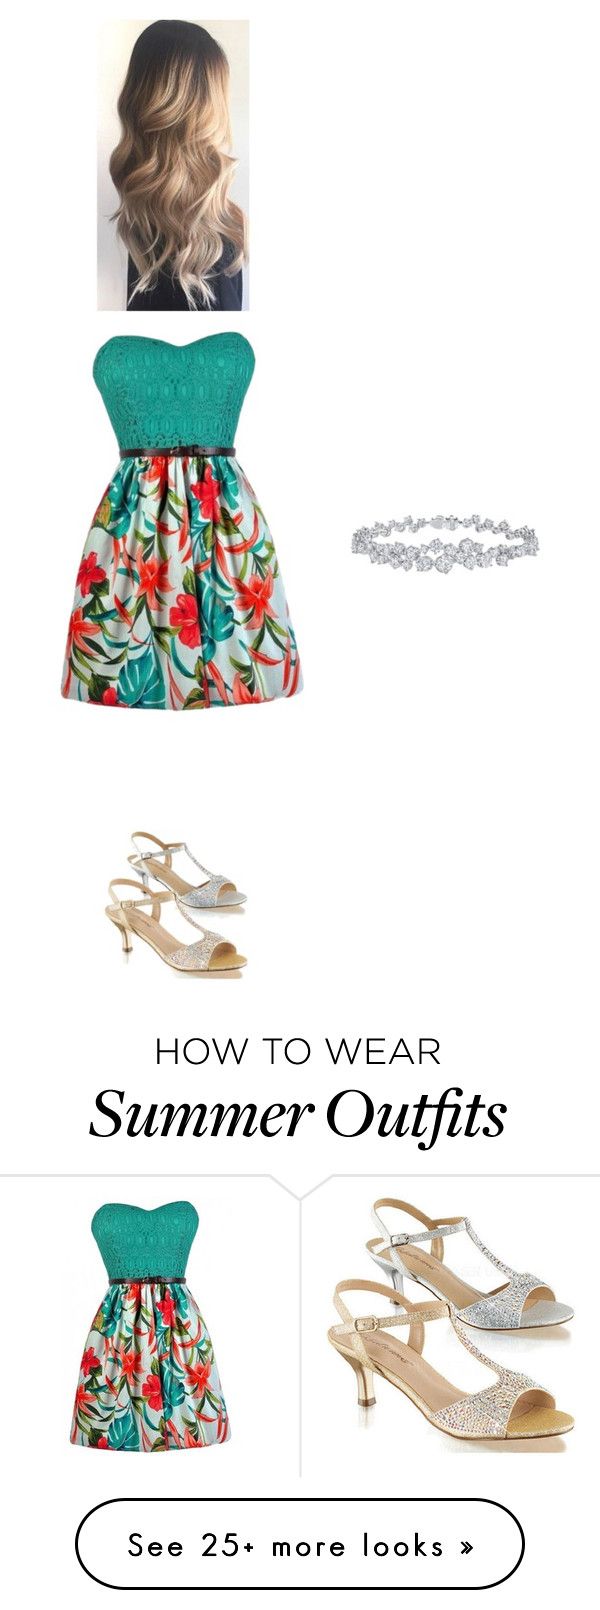 "Summer date outfit" by aak52610 on Polyvore featuring Fabulicious and...